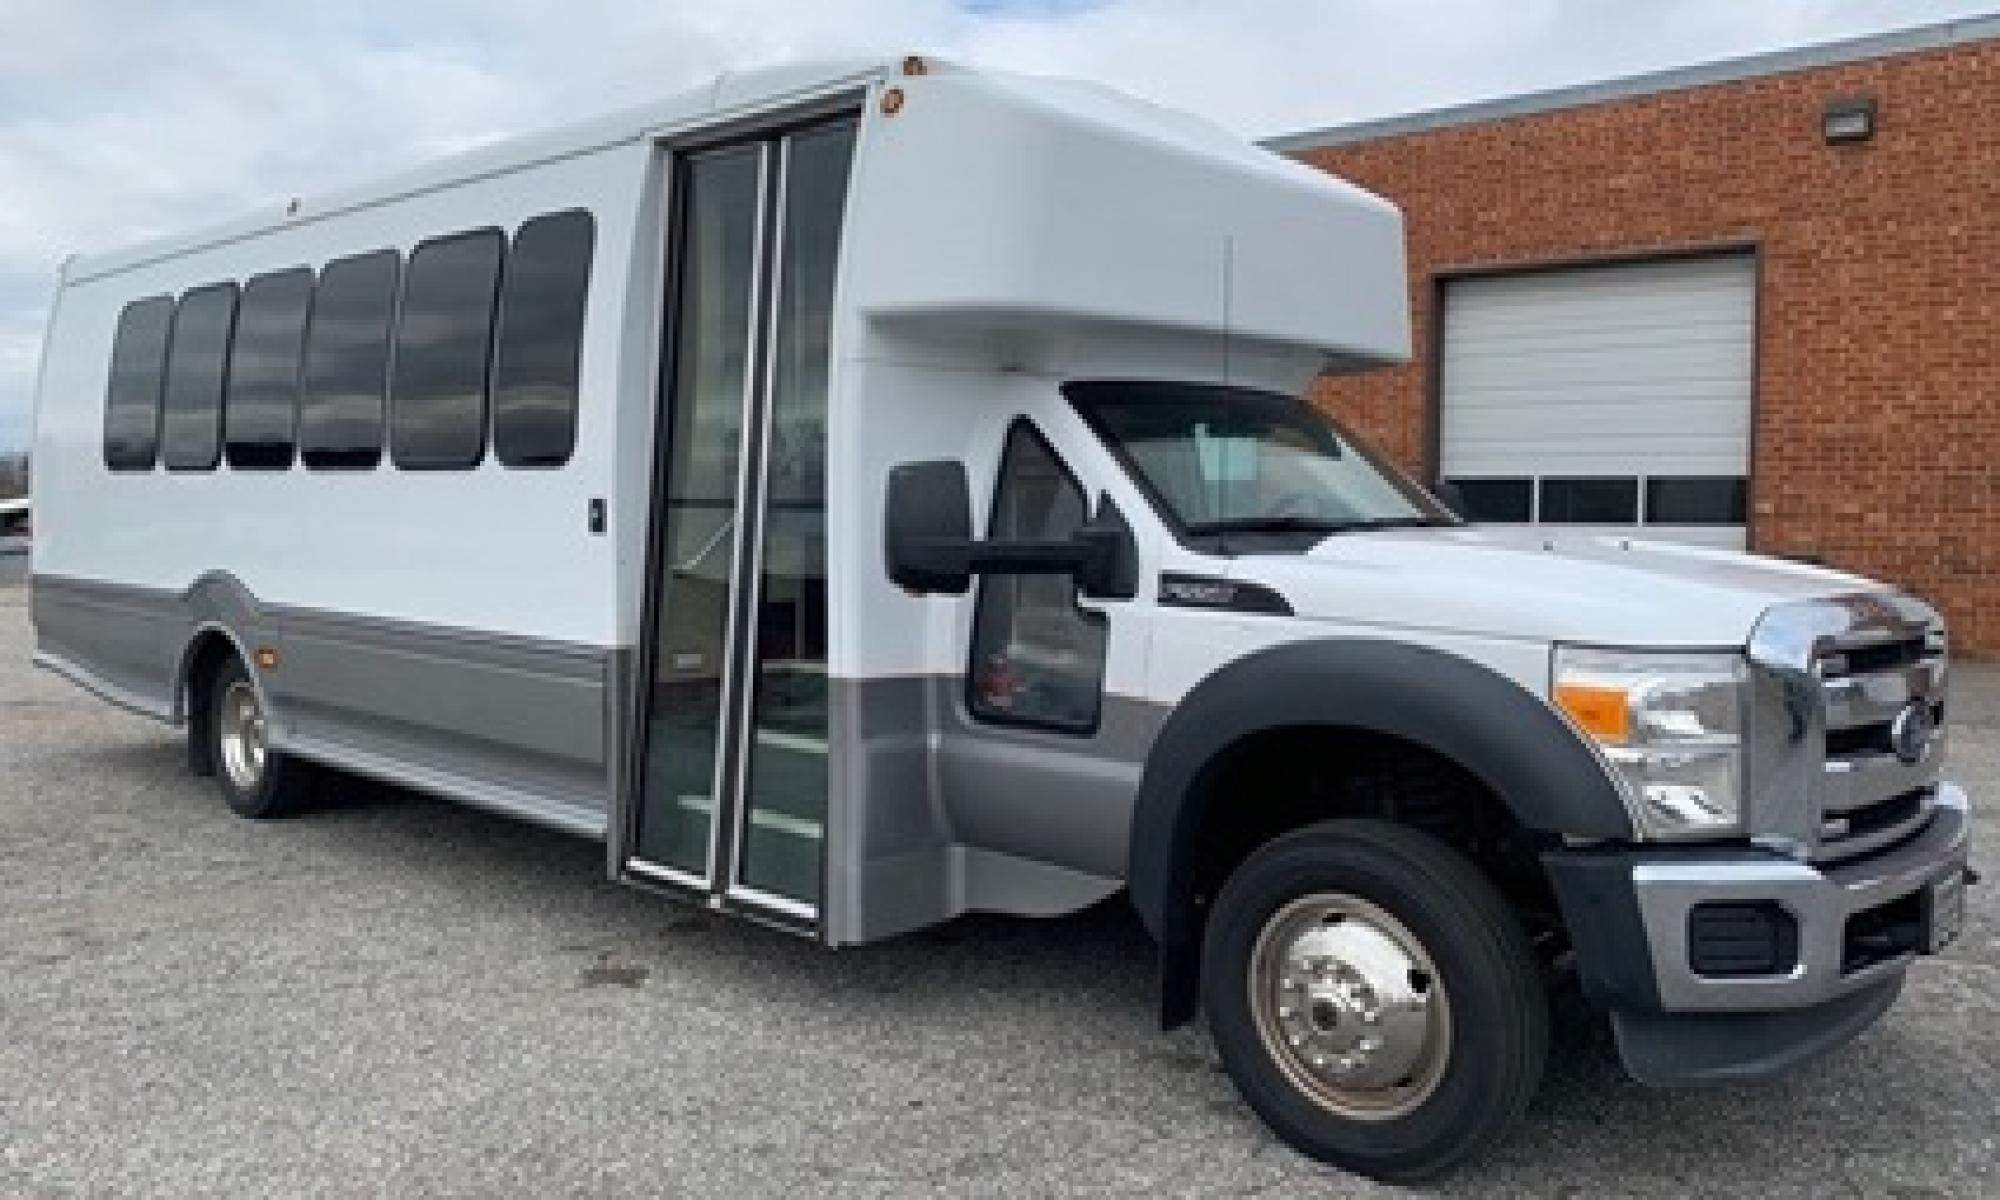 2014 White Ford F550 with an 6.7L engine, Auto transmission, 0.000000, 0.000000 - 2014 Ford F-550, Turtle Top Odyssey XL,- 6.7L Diesel Engine,- Automatic Trans,- Electric Entrance,Door,- 25 Passengers & Driver,- Mid Back Reclining Seats,- Retractable Seat Belts, - 110V Outlets,- Rear Dedicated Luggage,- Stainless Wheel Simulators,- Front and Rear A/C. - Photo #0